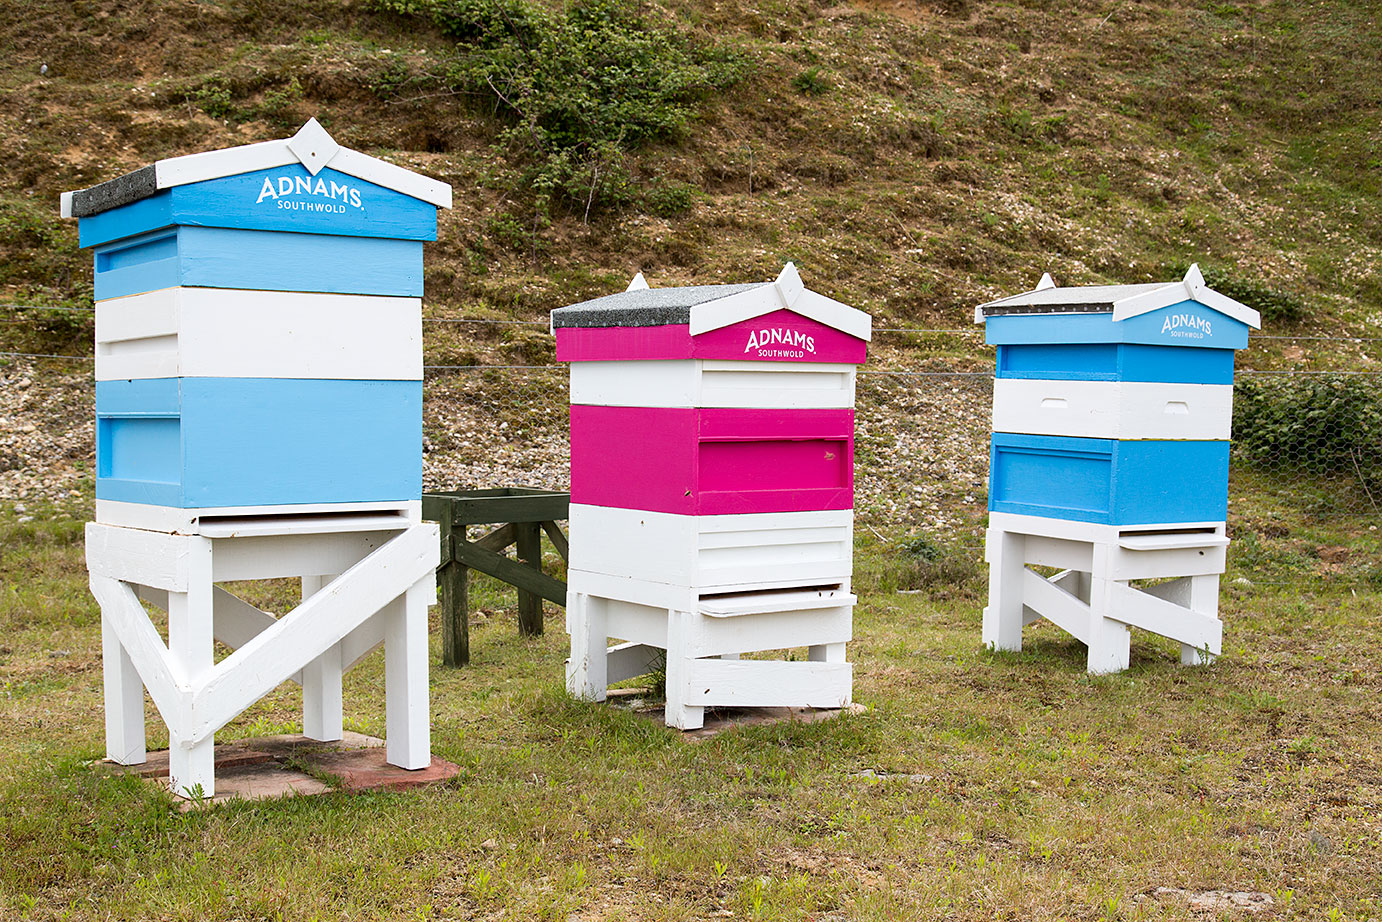 Adnams apiaries: the land is also home to barn owls, sand martins, and great crested newts